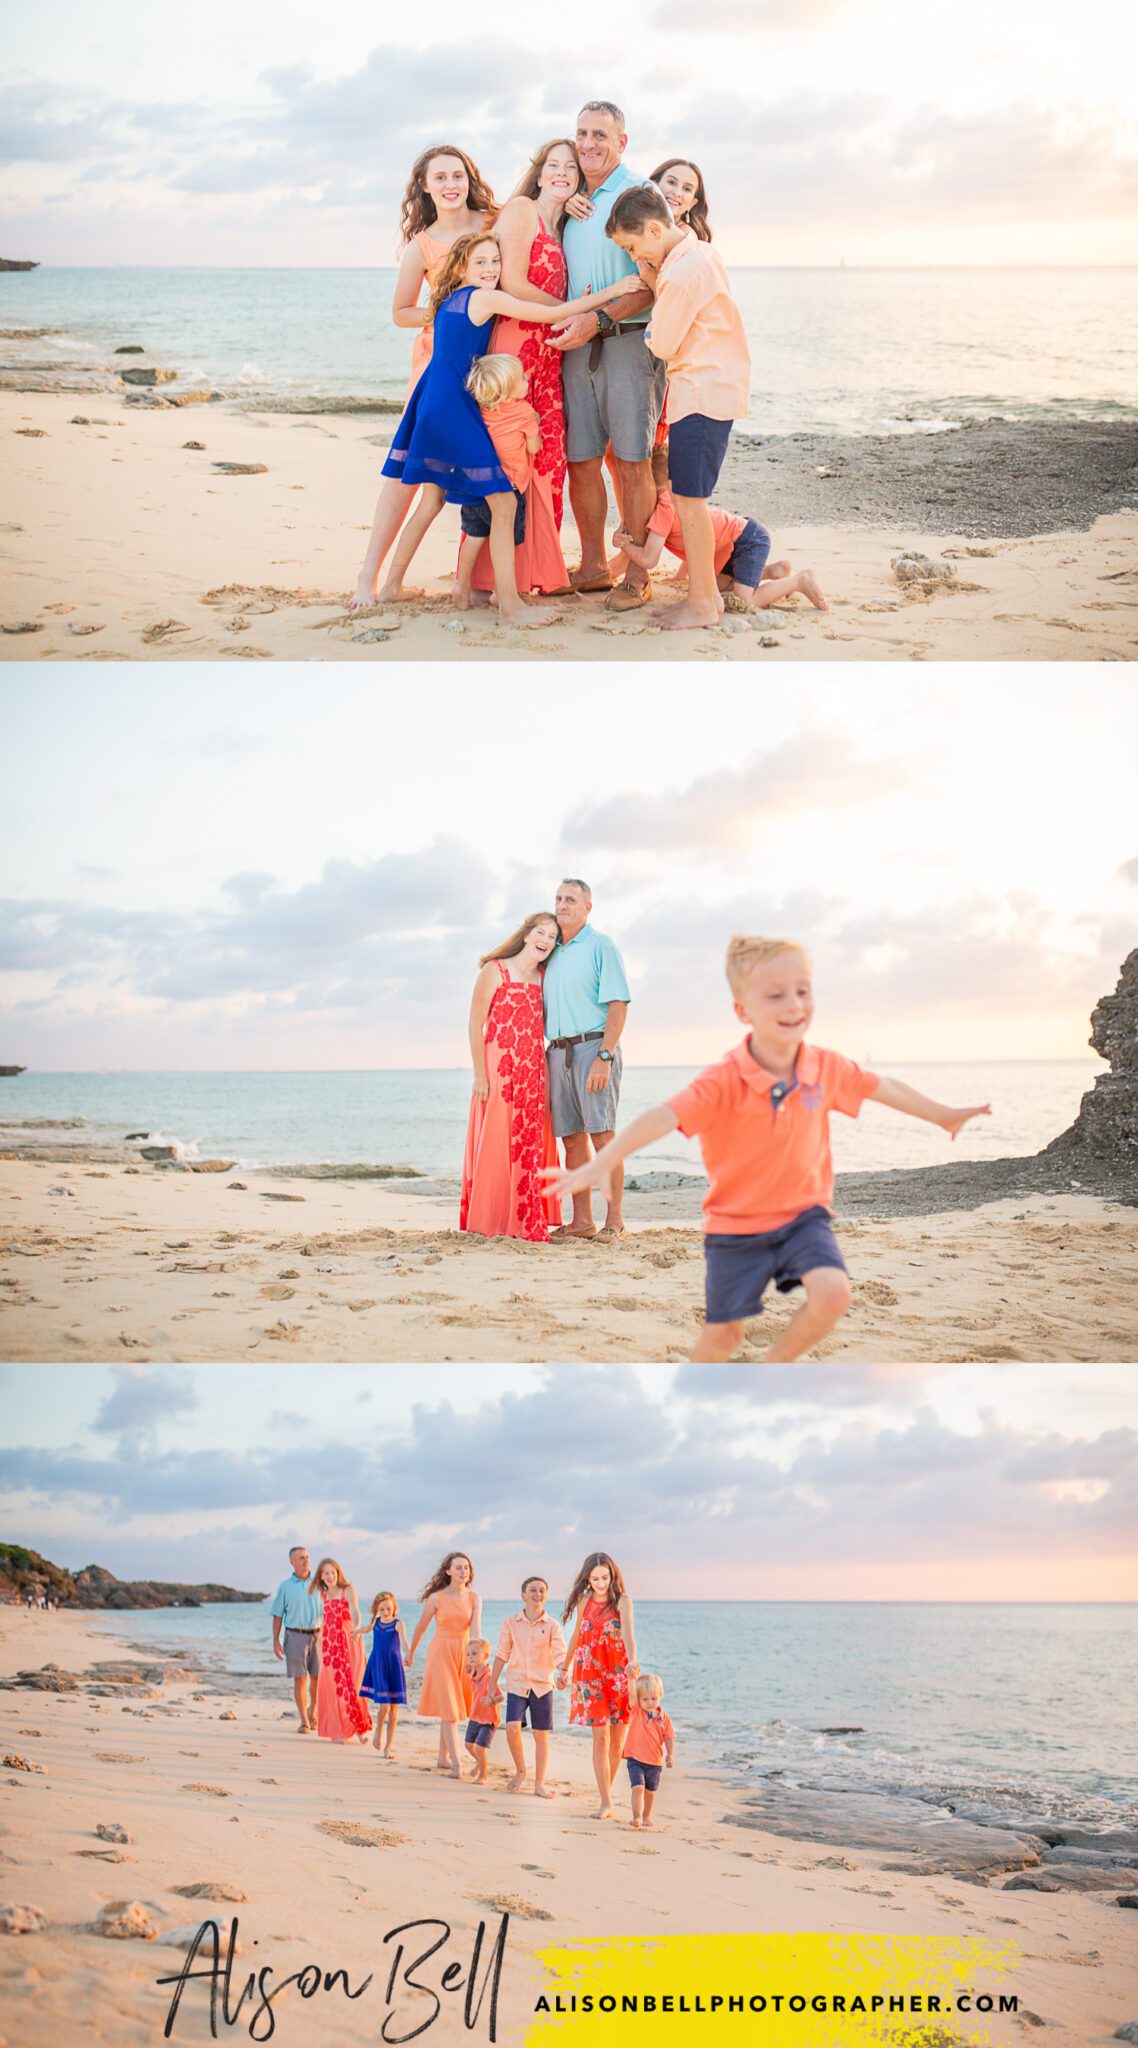 Family Photographers in Oahu Hawaii by Alison Bell, Photographer